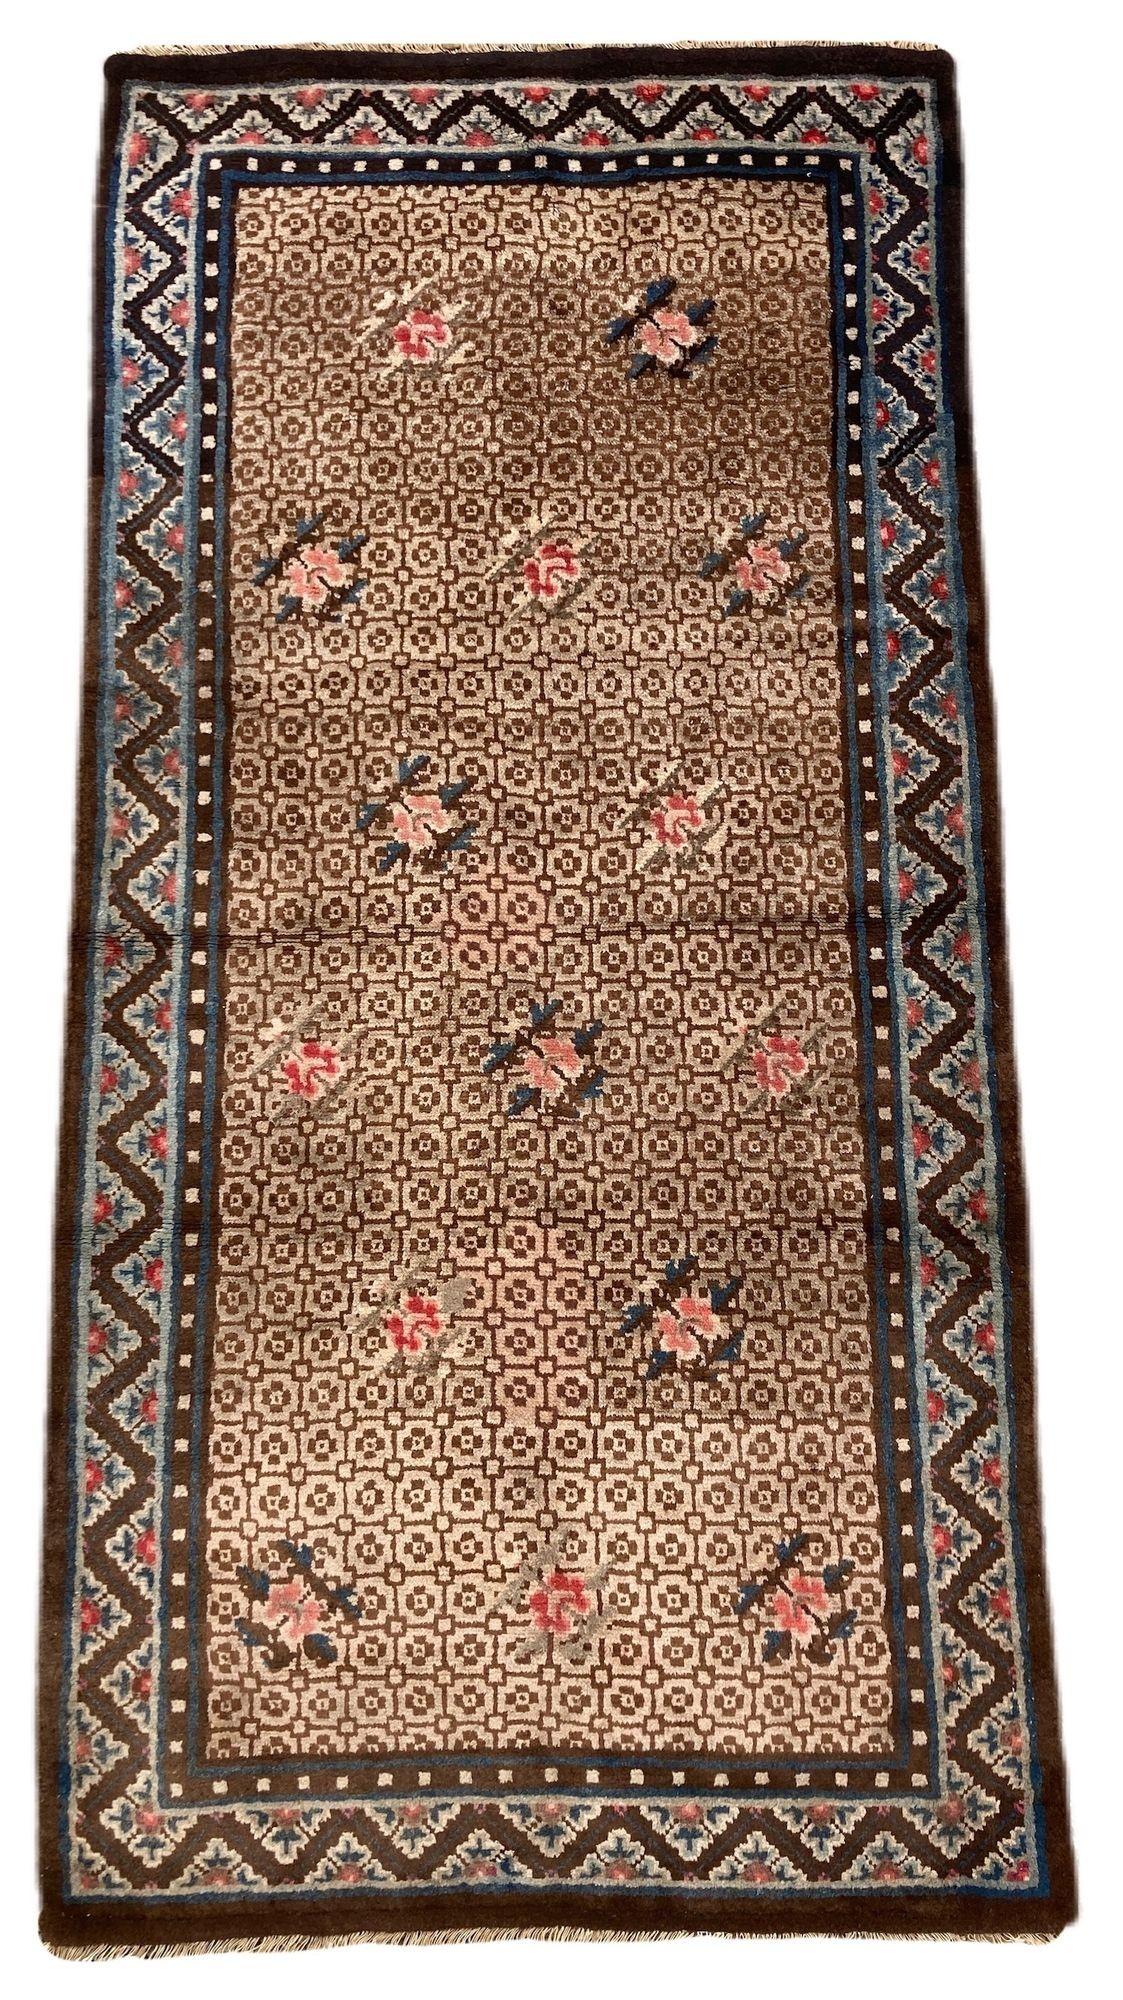 A lovely vintage Pao-Tao rug, handwoven in China circa 1940 with an all over design interspersed with flowers on a light beige field and simple border.
Size: 1.76m x 0.85m (5ft 9in x 2ft 10in)
This rug is in good condition with light age related